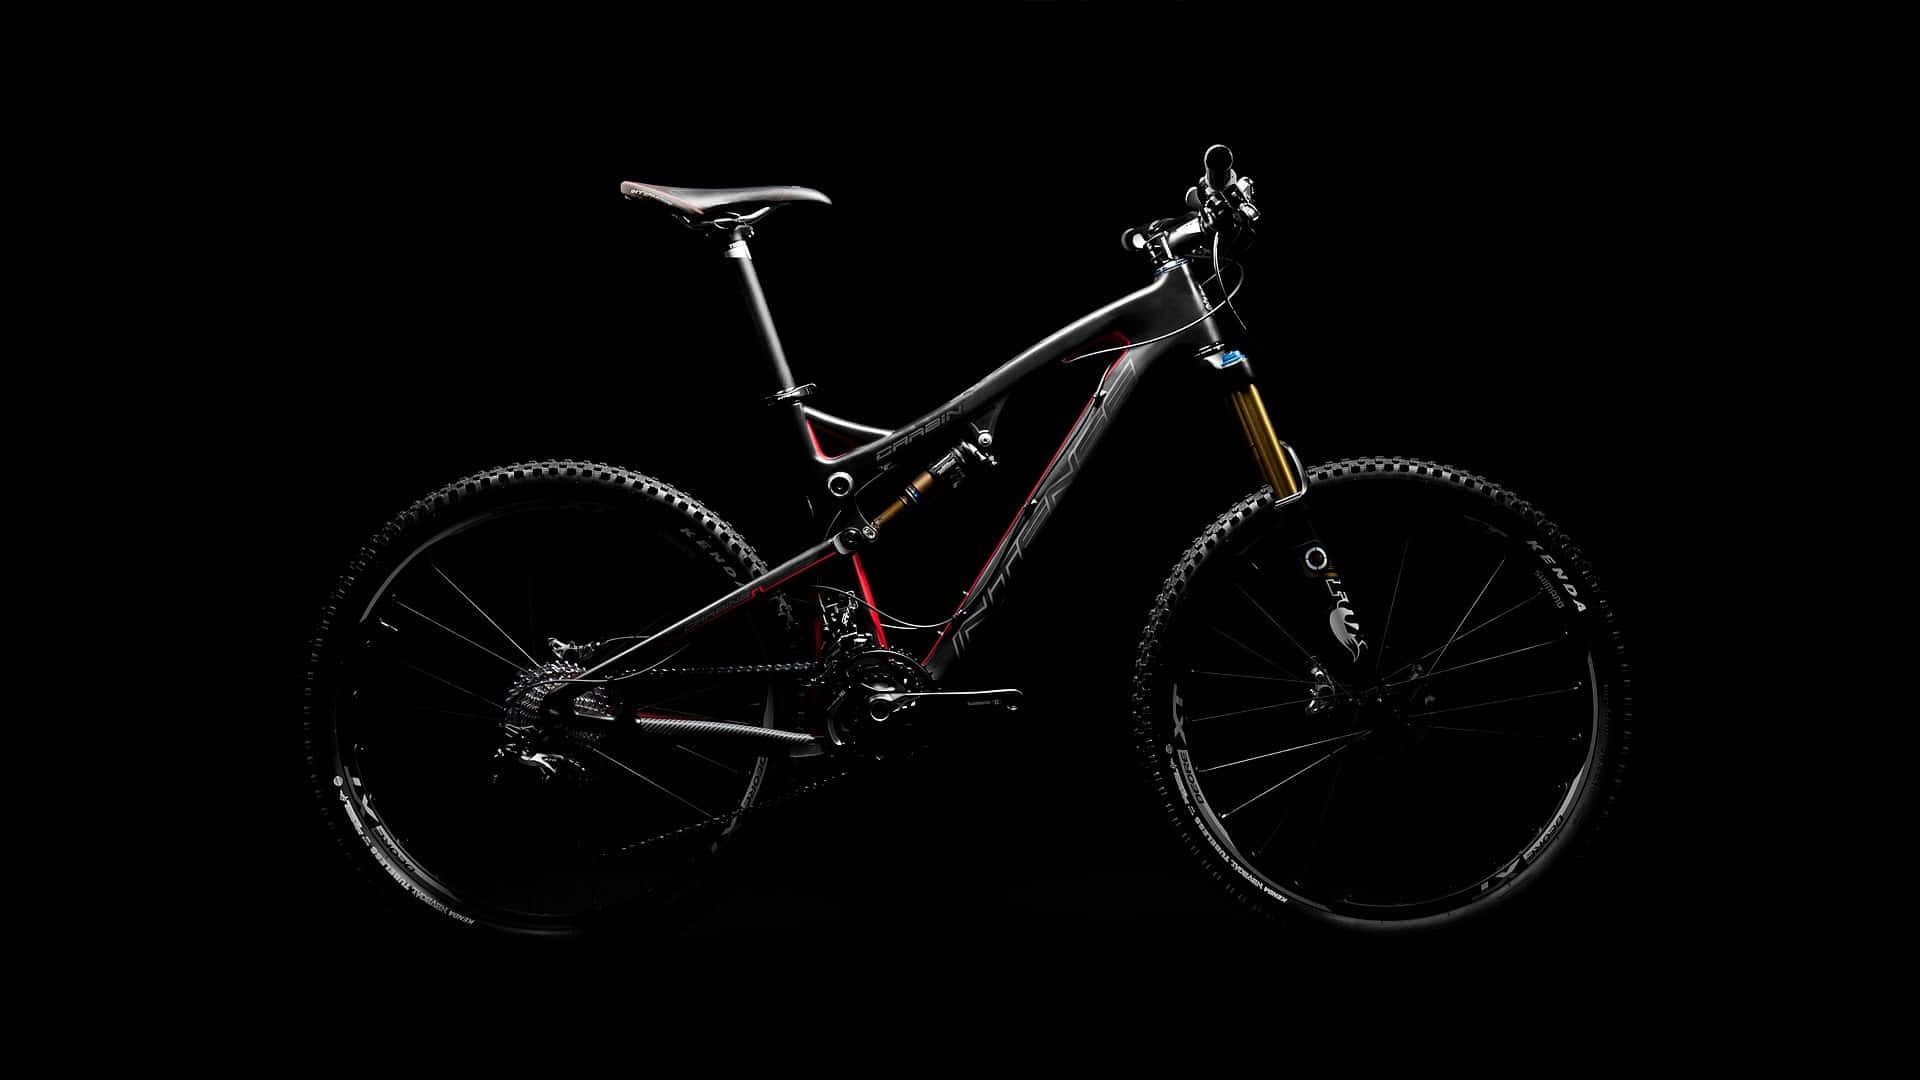 Captivating Specialized Mountain Bike in Action Wallpaper